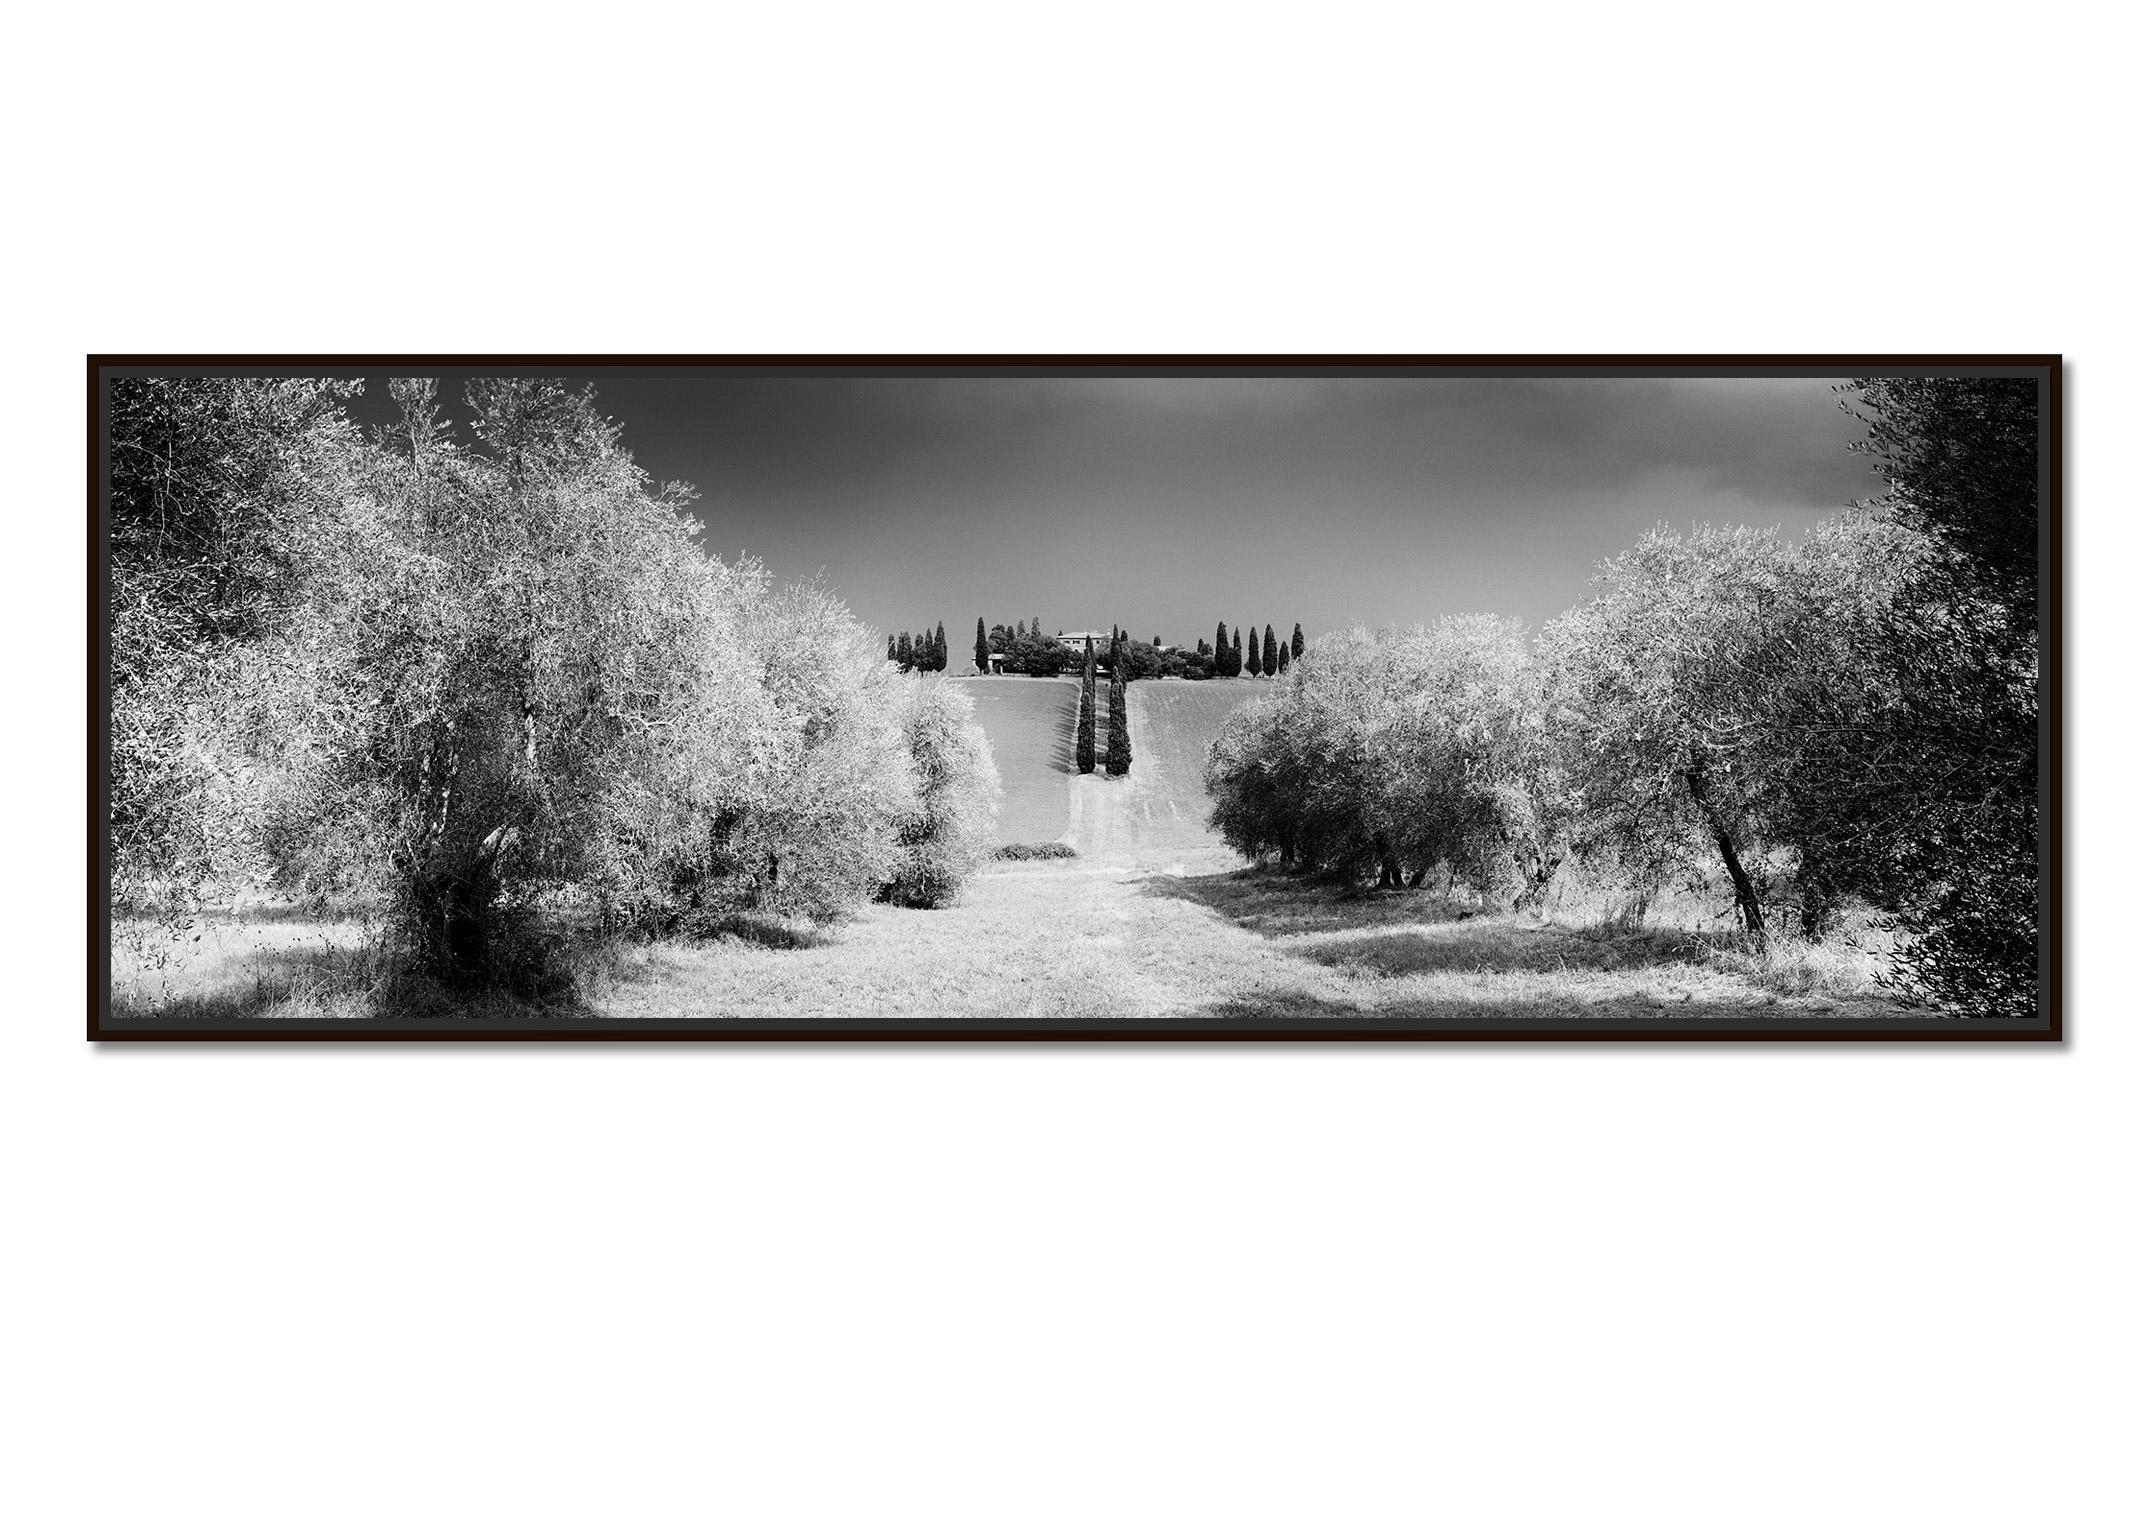 Cypress Trees, Rural House, Tuscany, black and white photography, landscape - Photograph by Gerald Berghammer